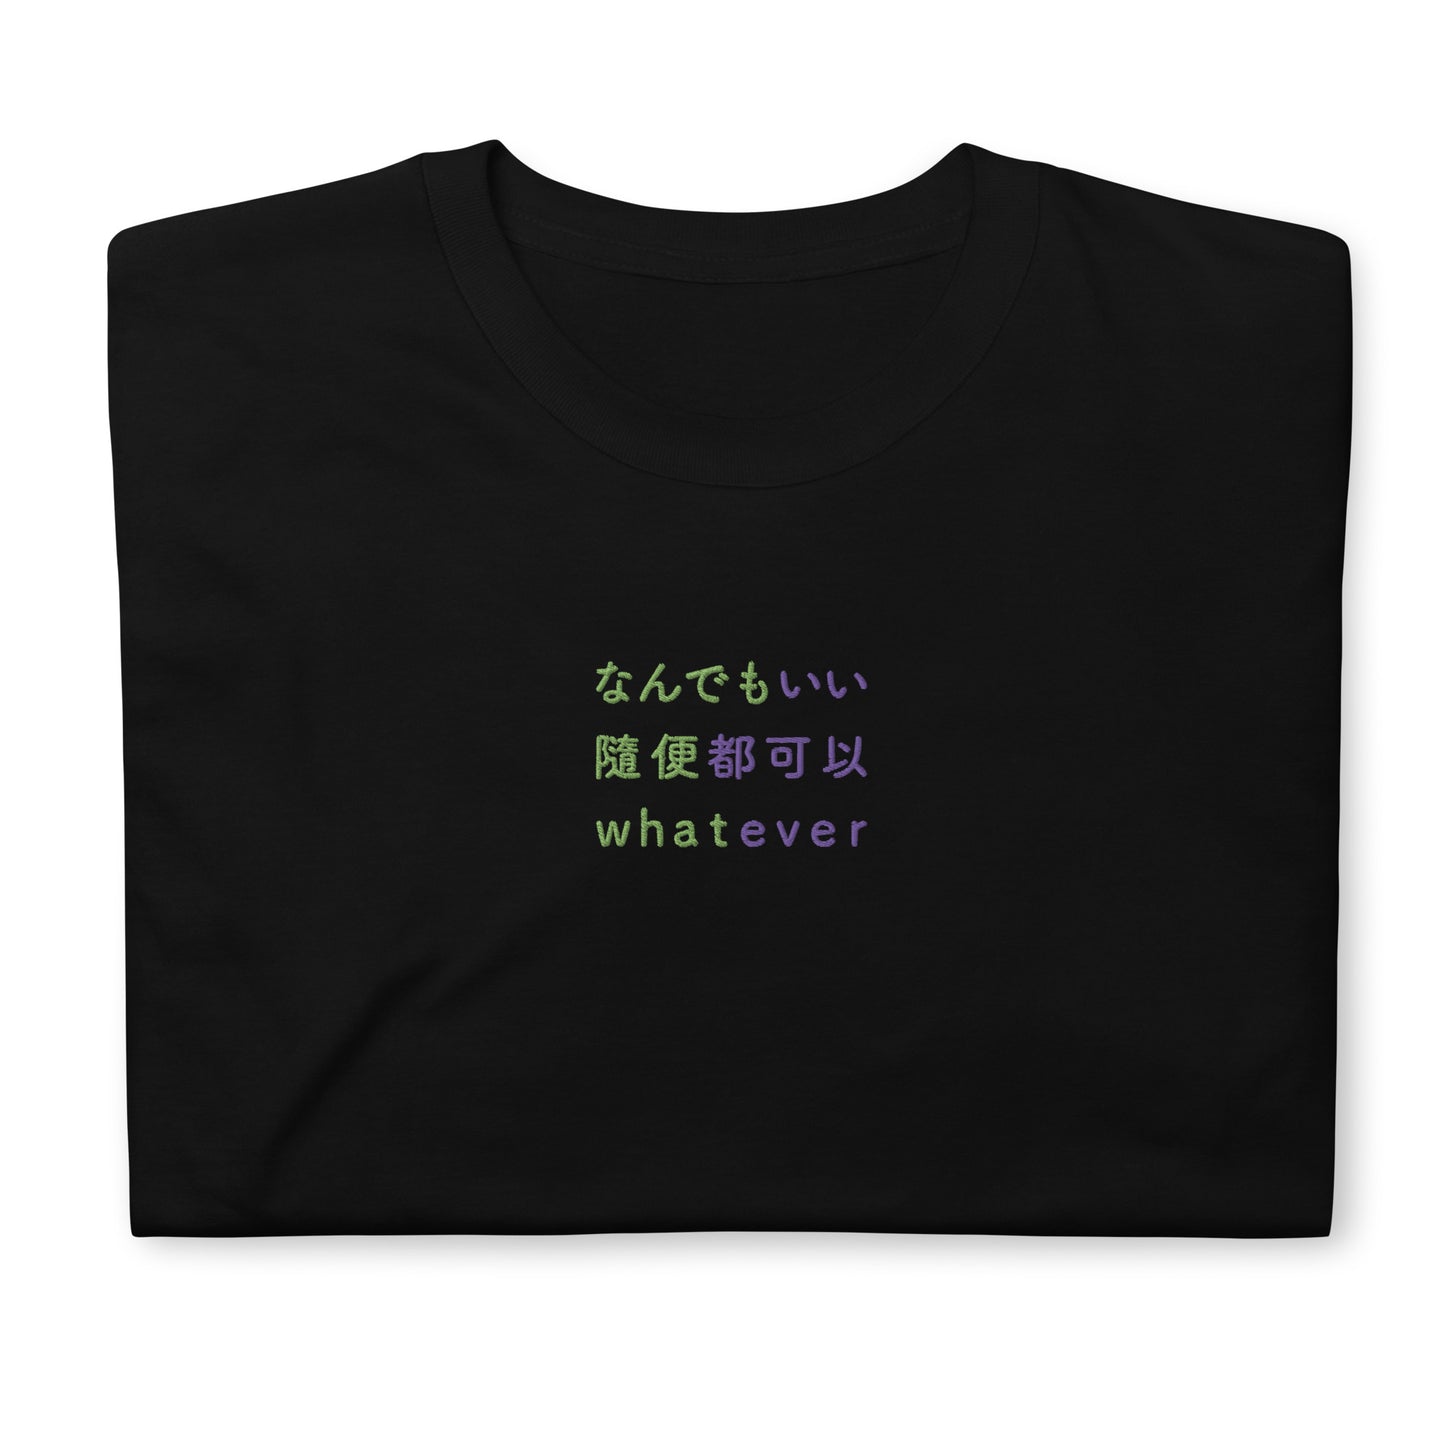 Black High Quality Tee - Front Design with an Green,Purple Embroidery "Whatever" in Japanese,Chinese and English